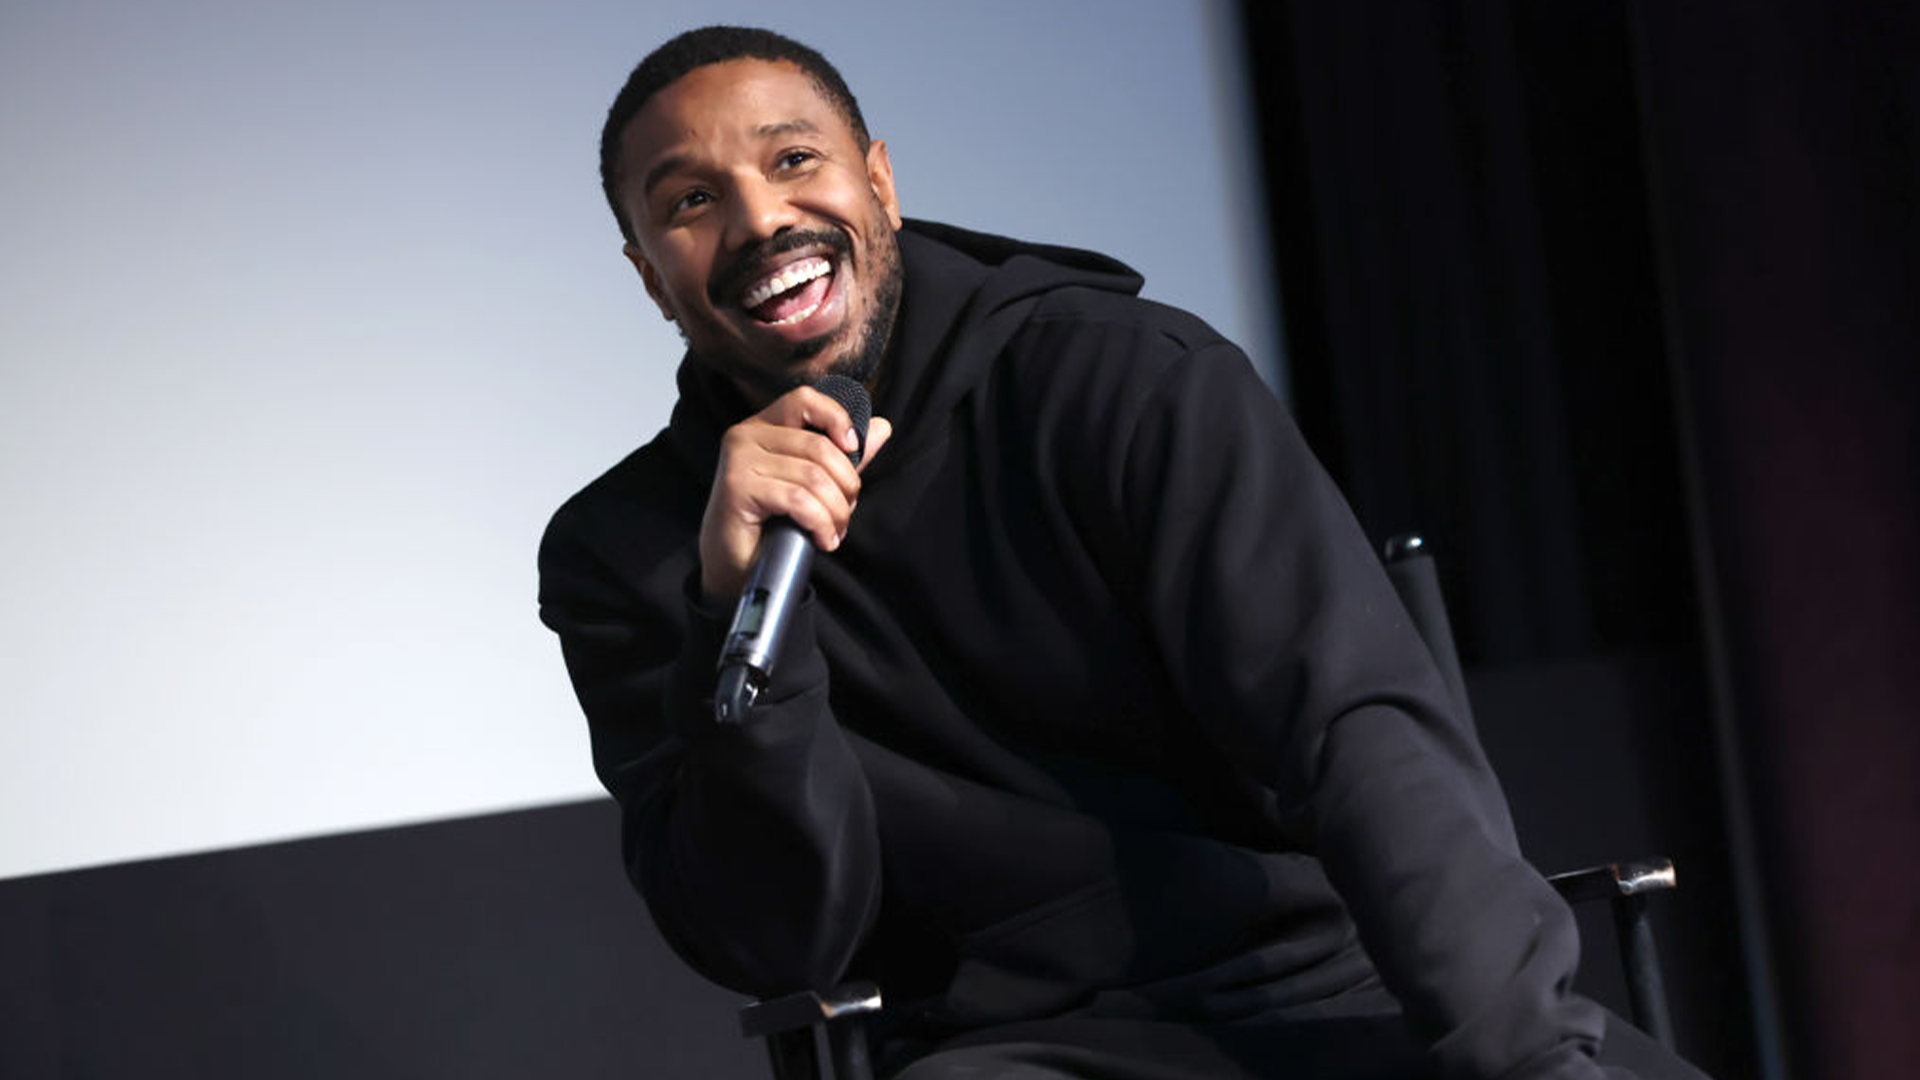 Michael B. Jordan Takes Inspiration From His Mother's Lupus Journey By Making Health Resources More Accessible In Black Communities